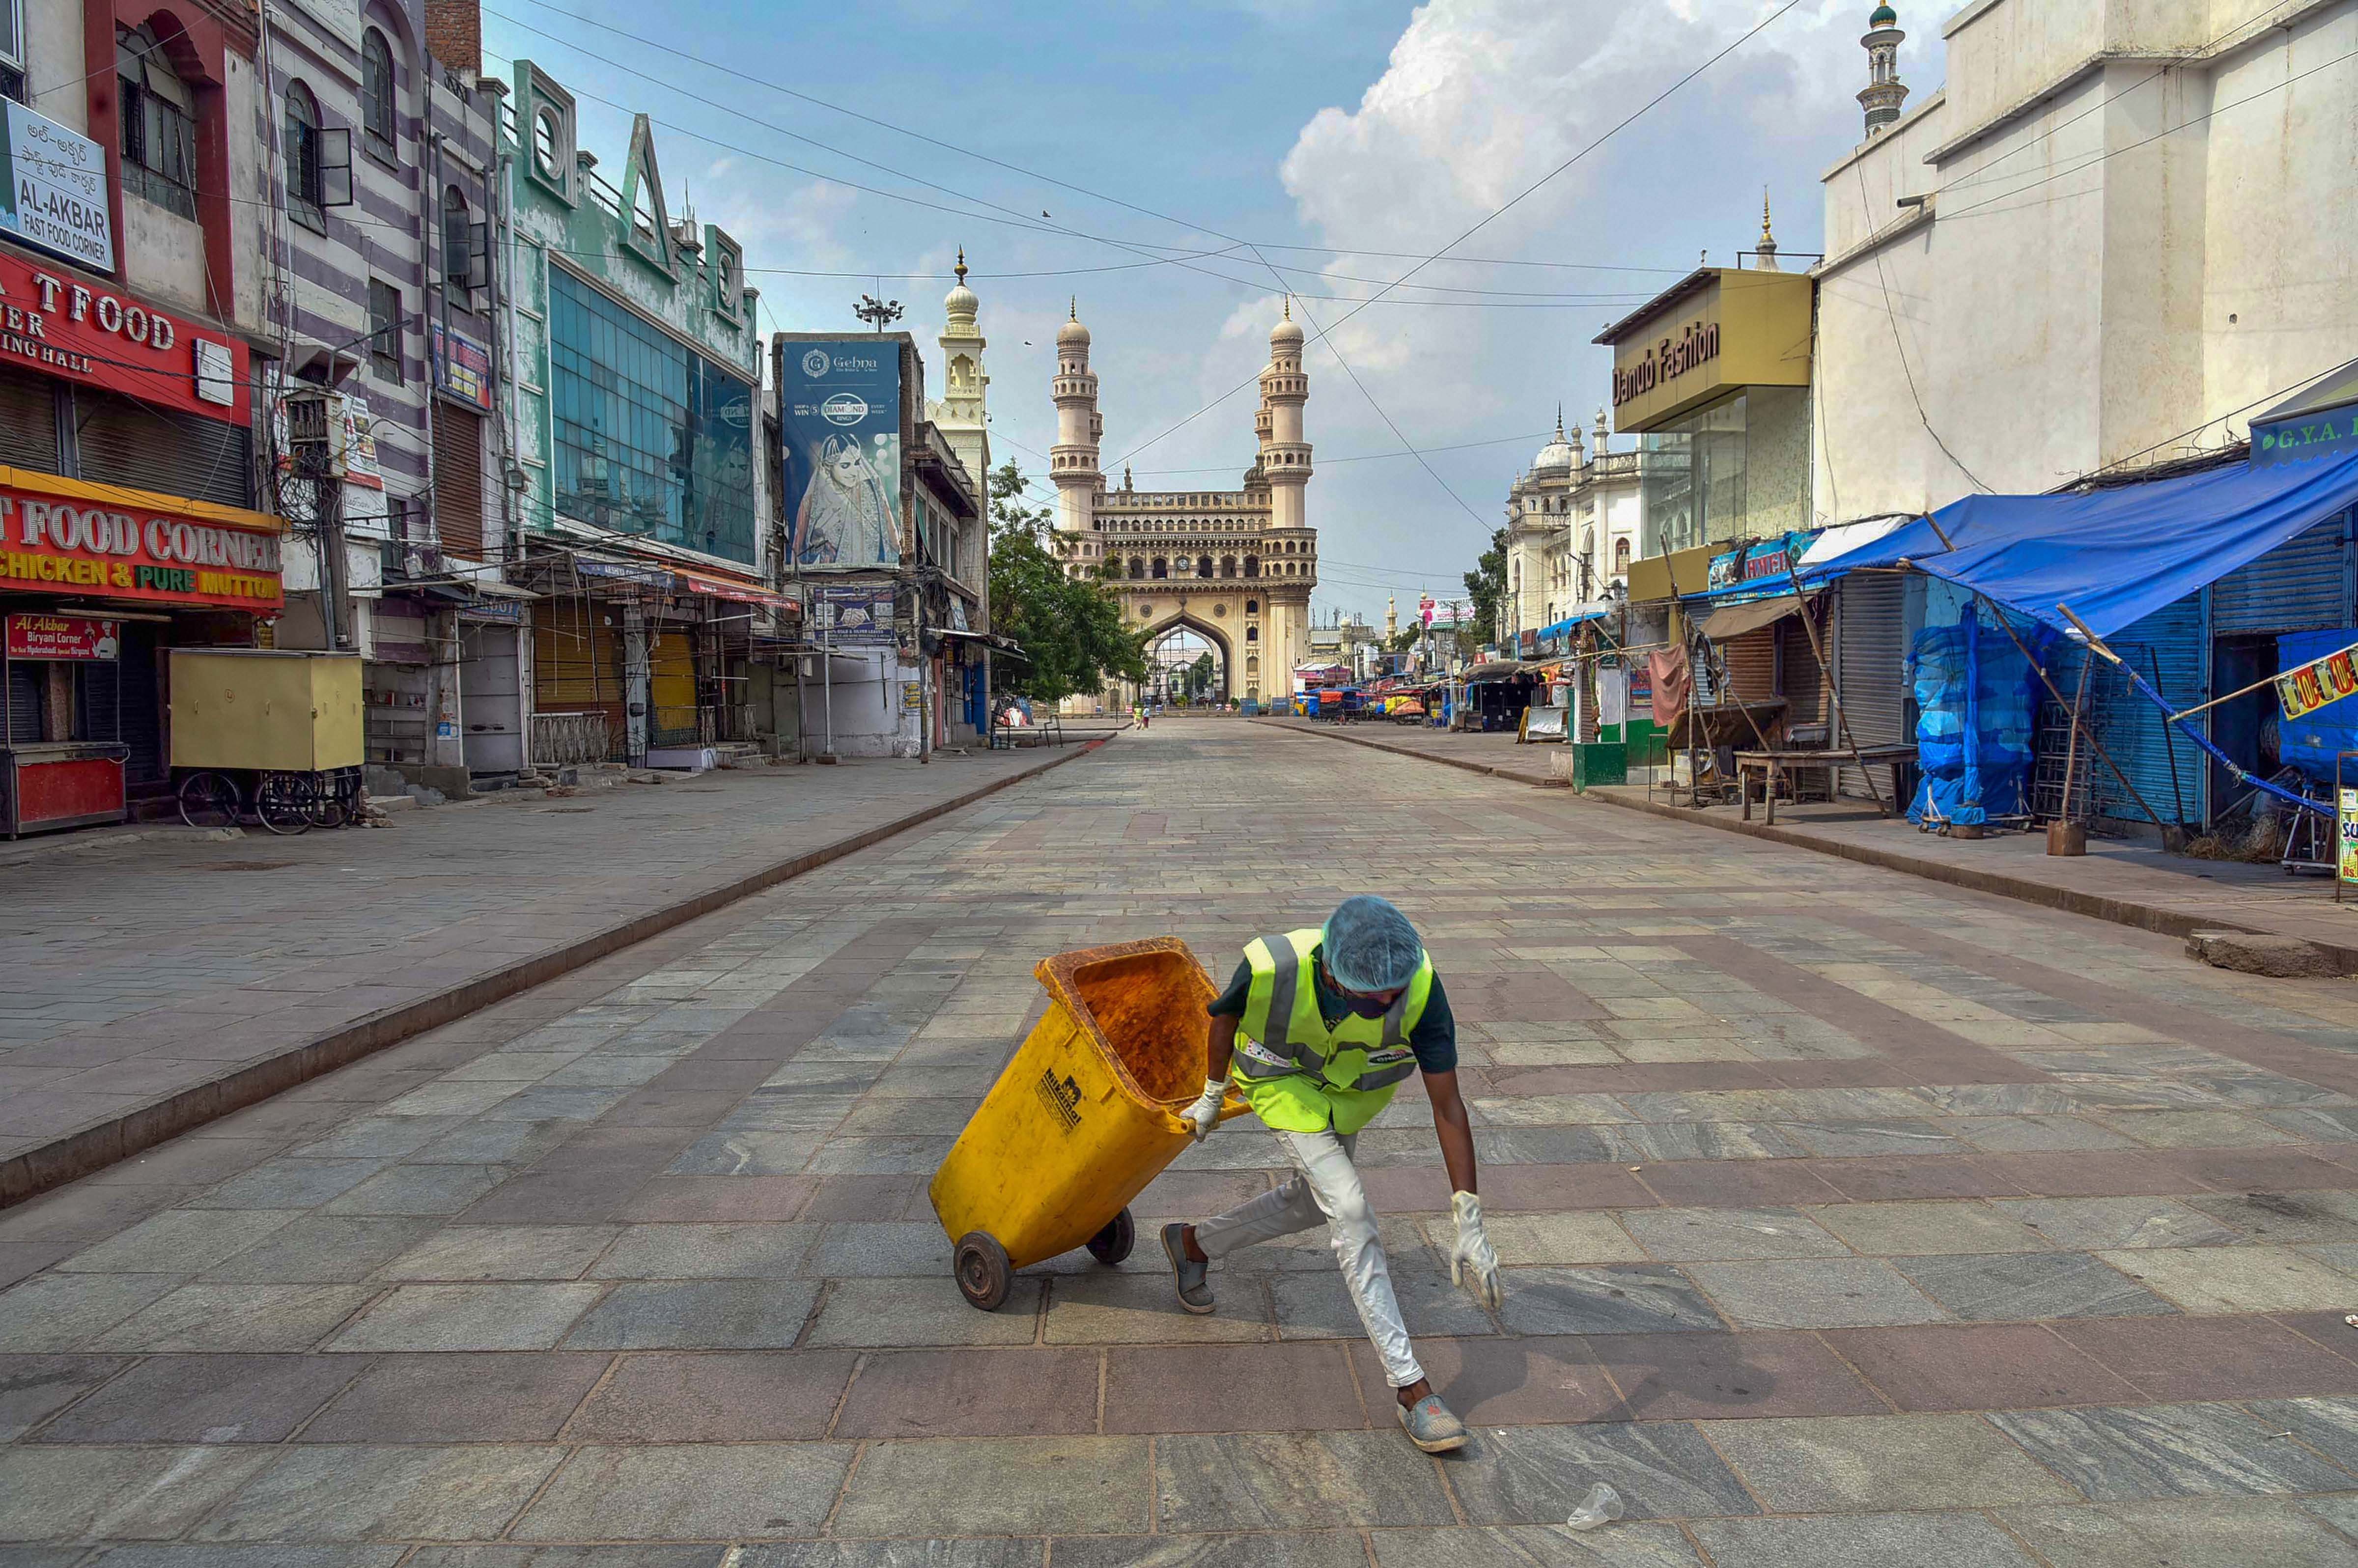 A GHMC worker cleans an area during the nationwide lockdown, imposed in wake of the coronavirus pandemic, in the old city of Hyderabad, Tuesday, April 7, 2020. 